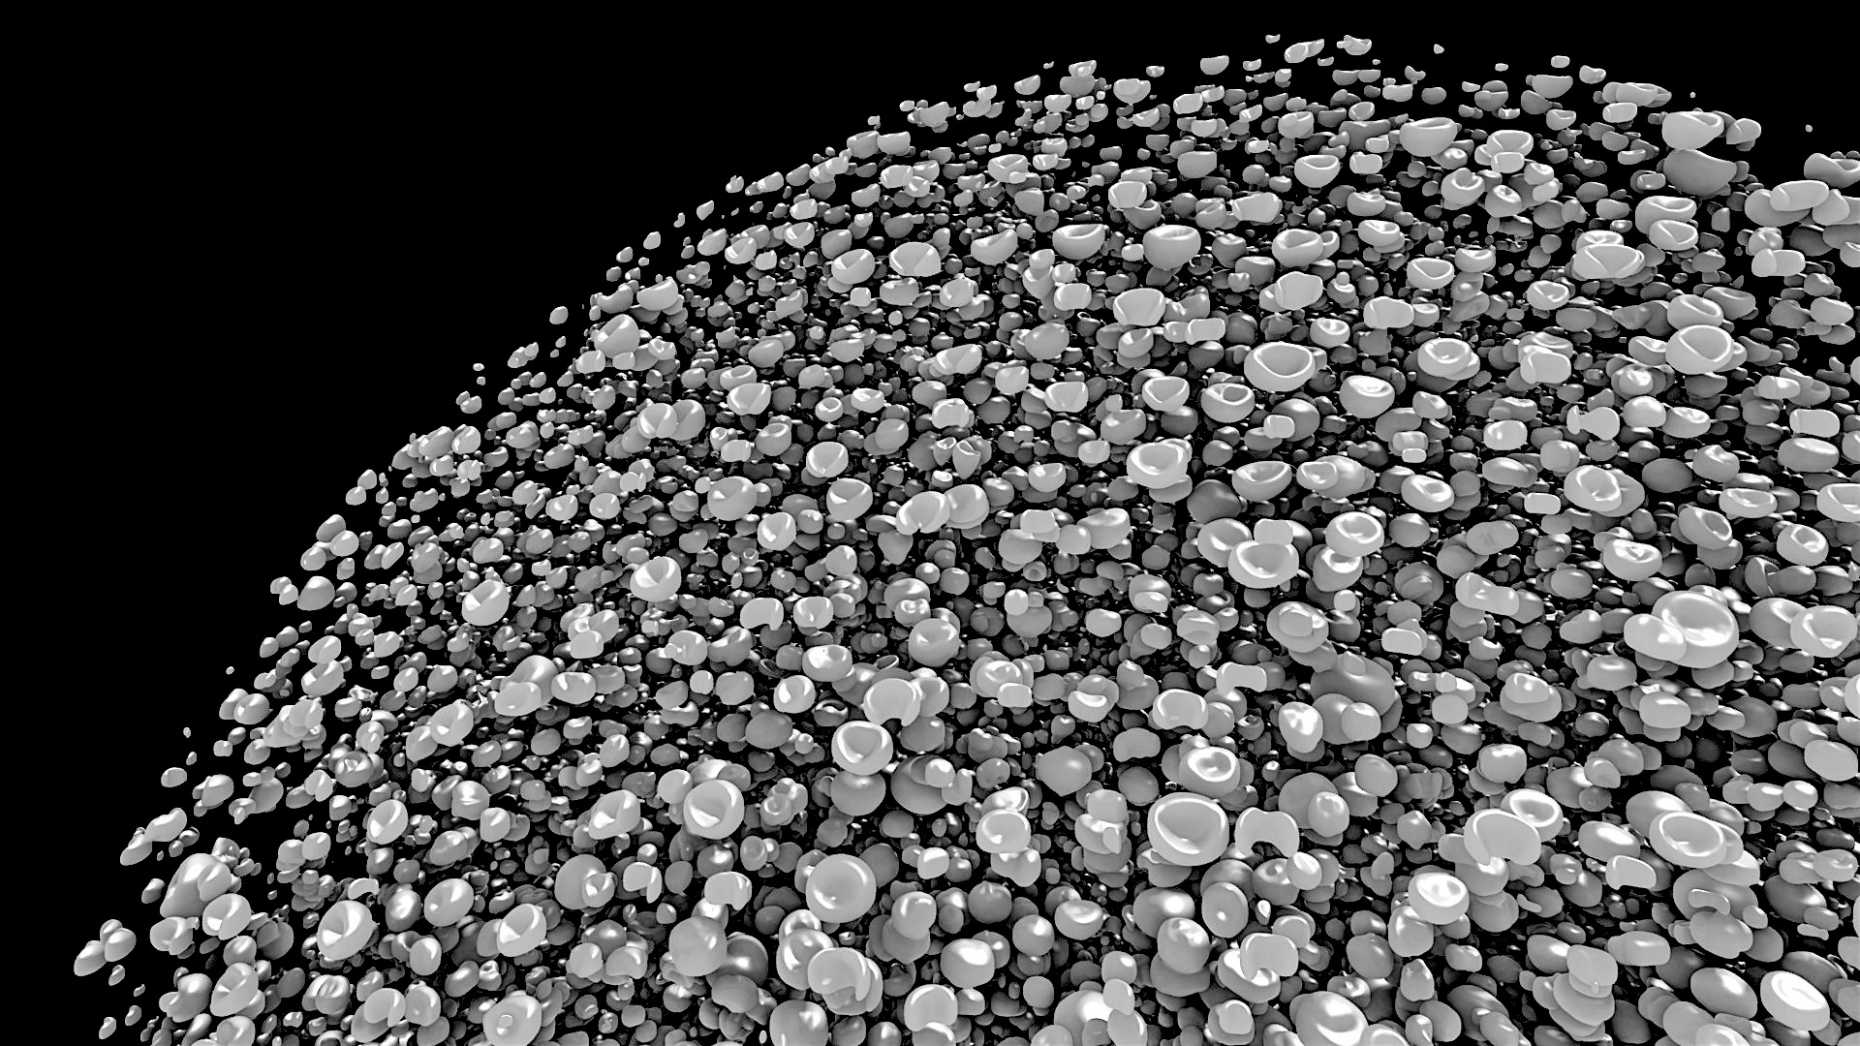 Enlarged view: Large-scale simulation of the collapse process of a spherical cloud with 50’000 bubbles.